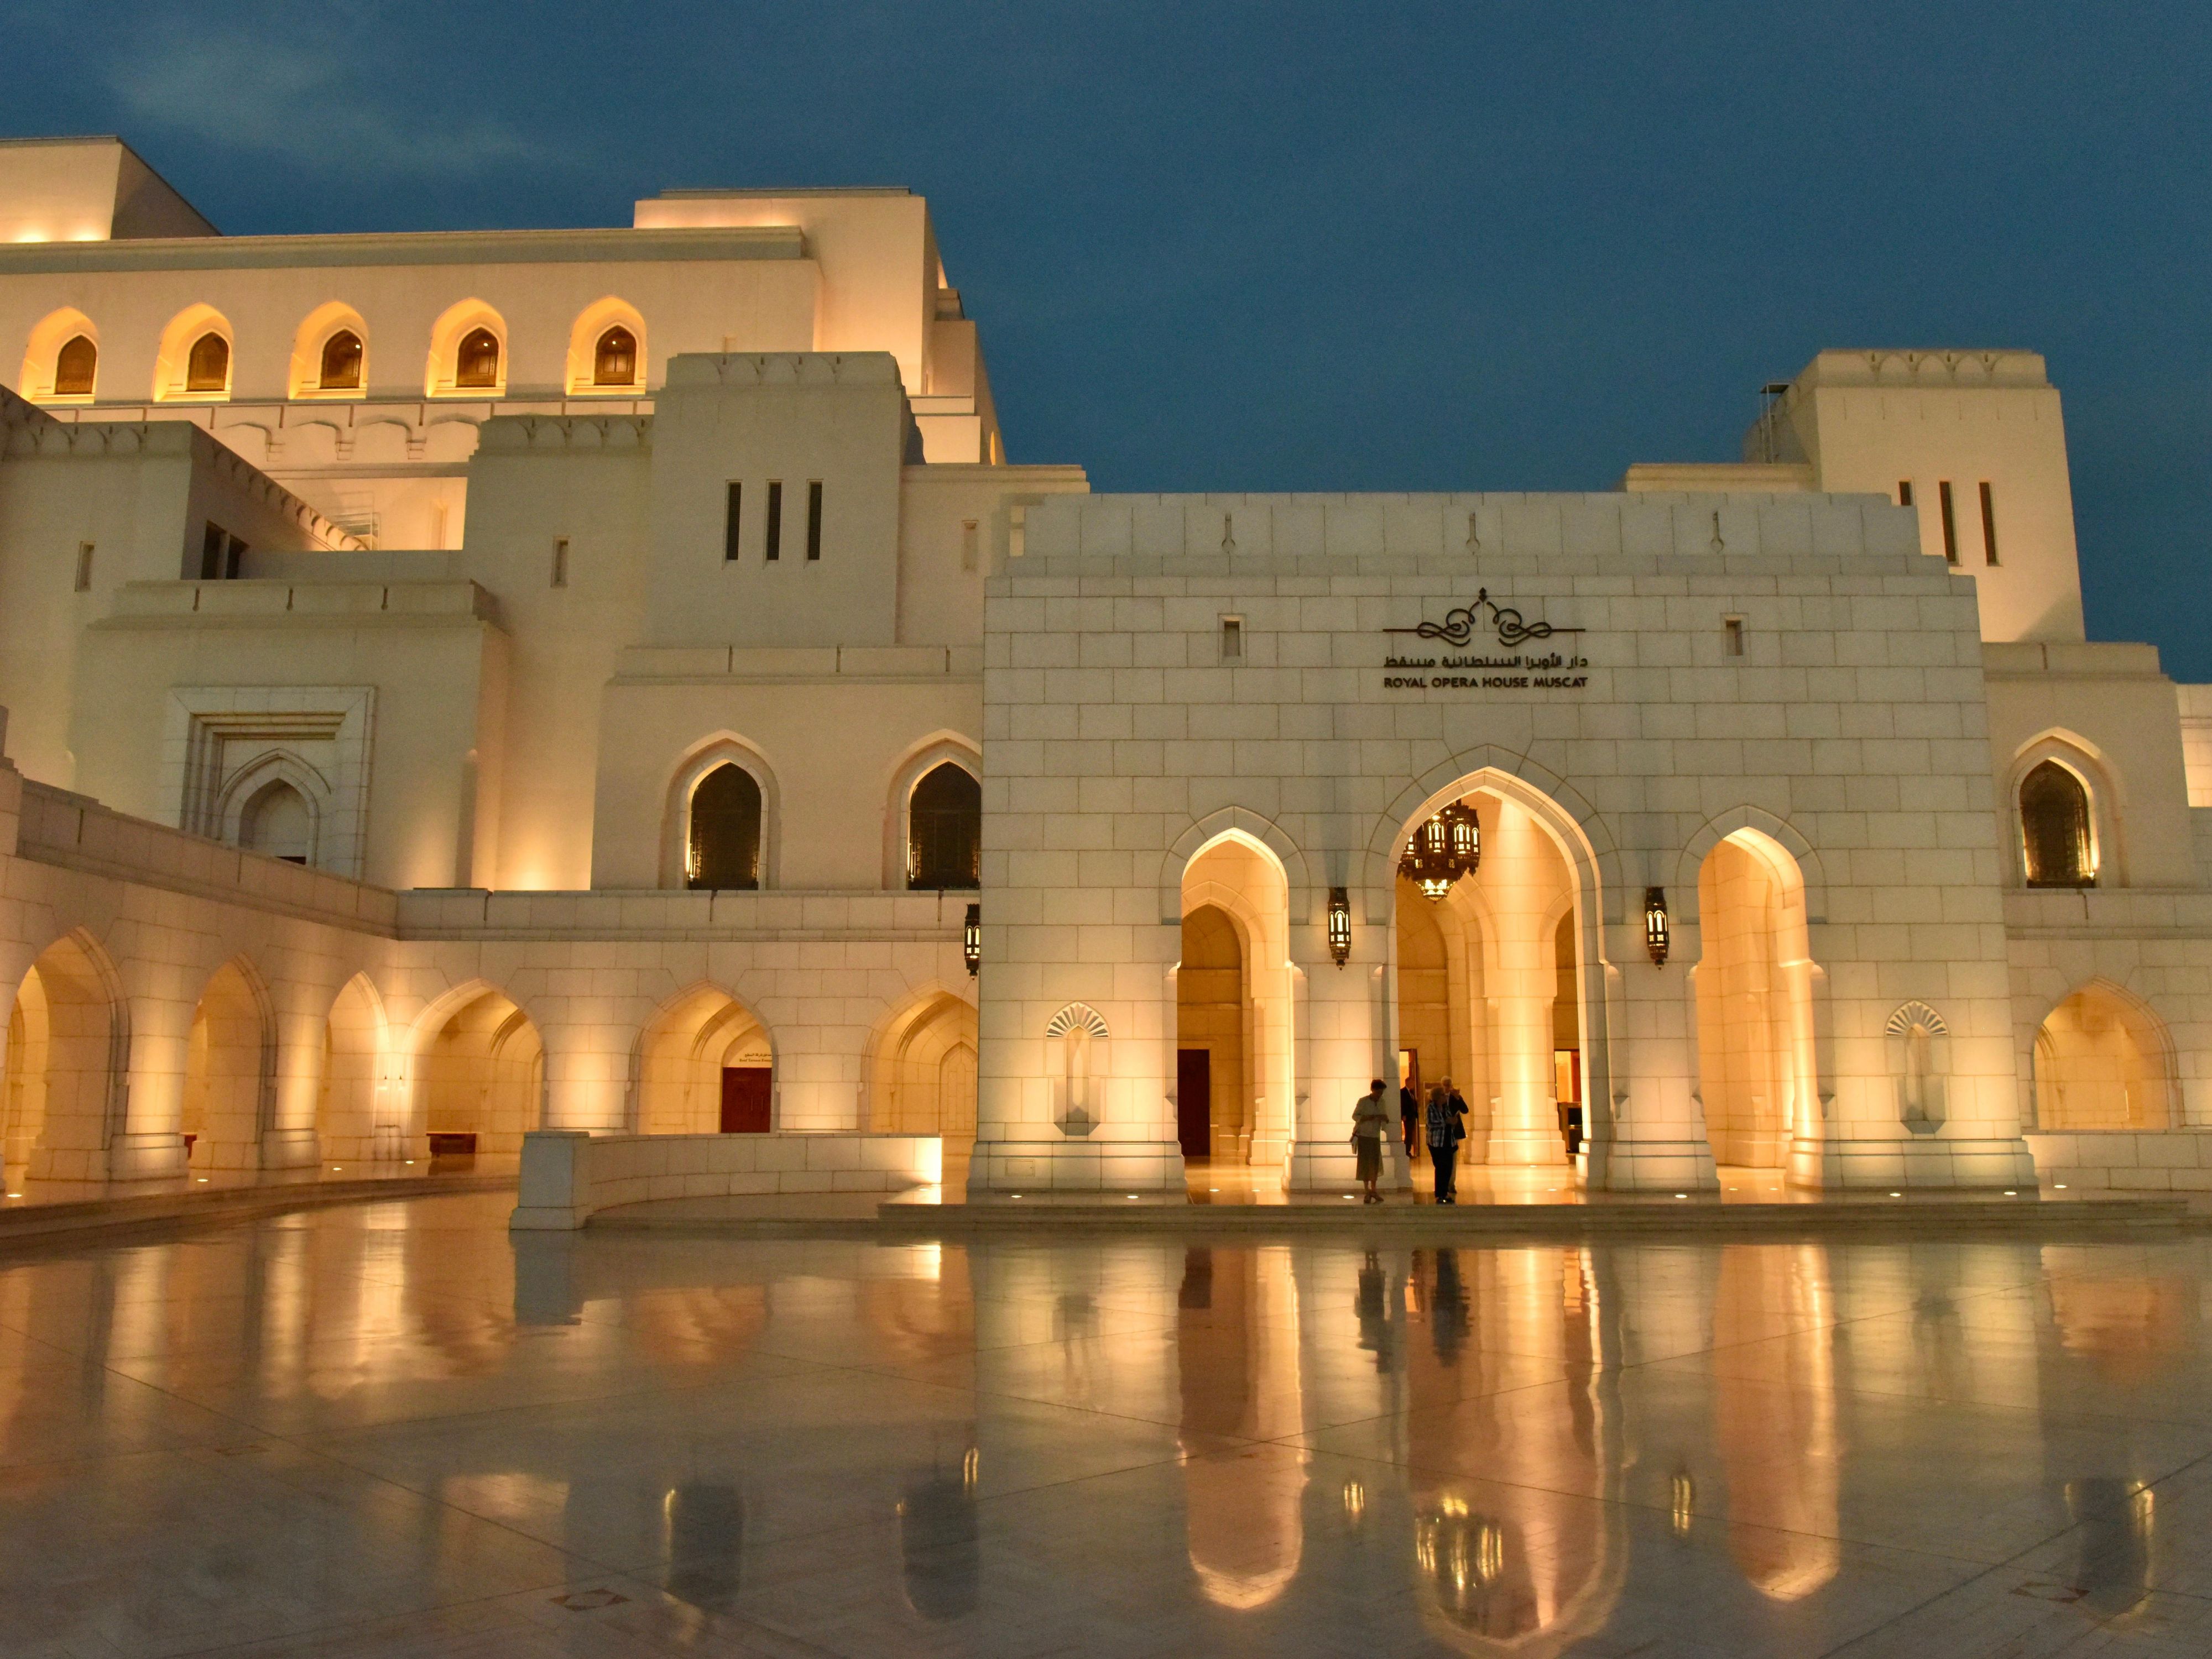 Don't miss out on any of Oman's popular landmarks with our daily complimentary shuttle service to the architecturally impressive Grand Mosque, the historic Muttrah Souq, and Mall of Oman.